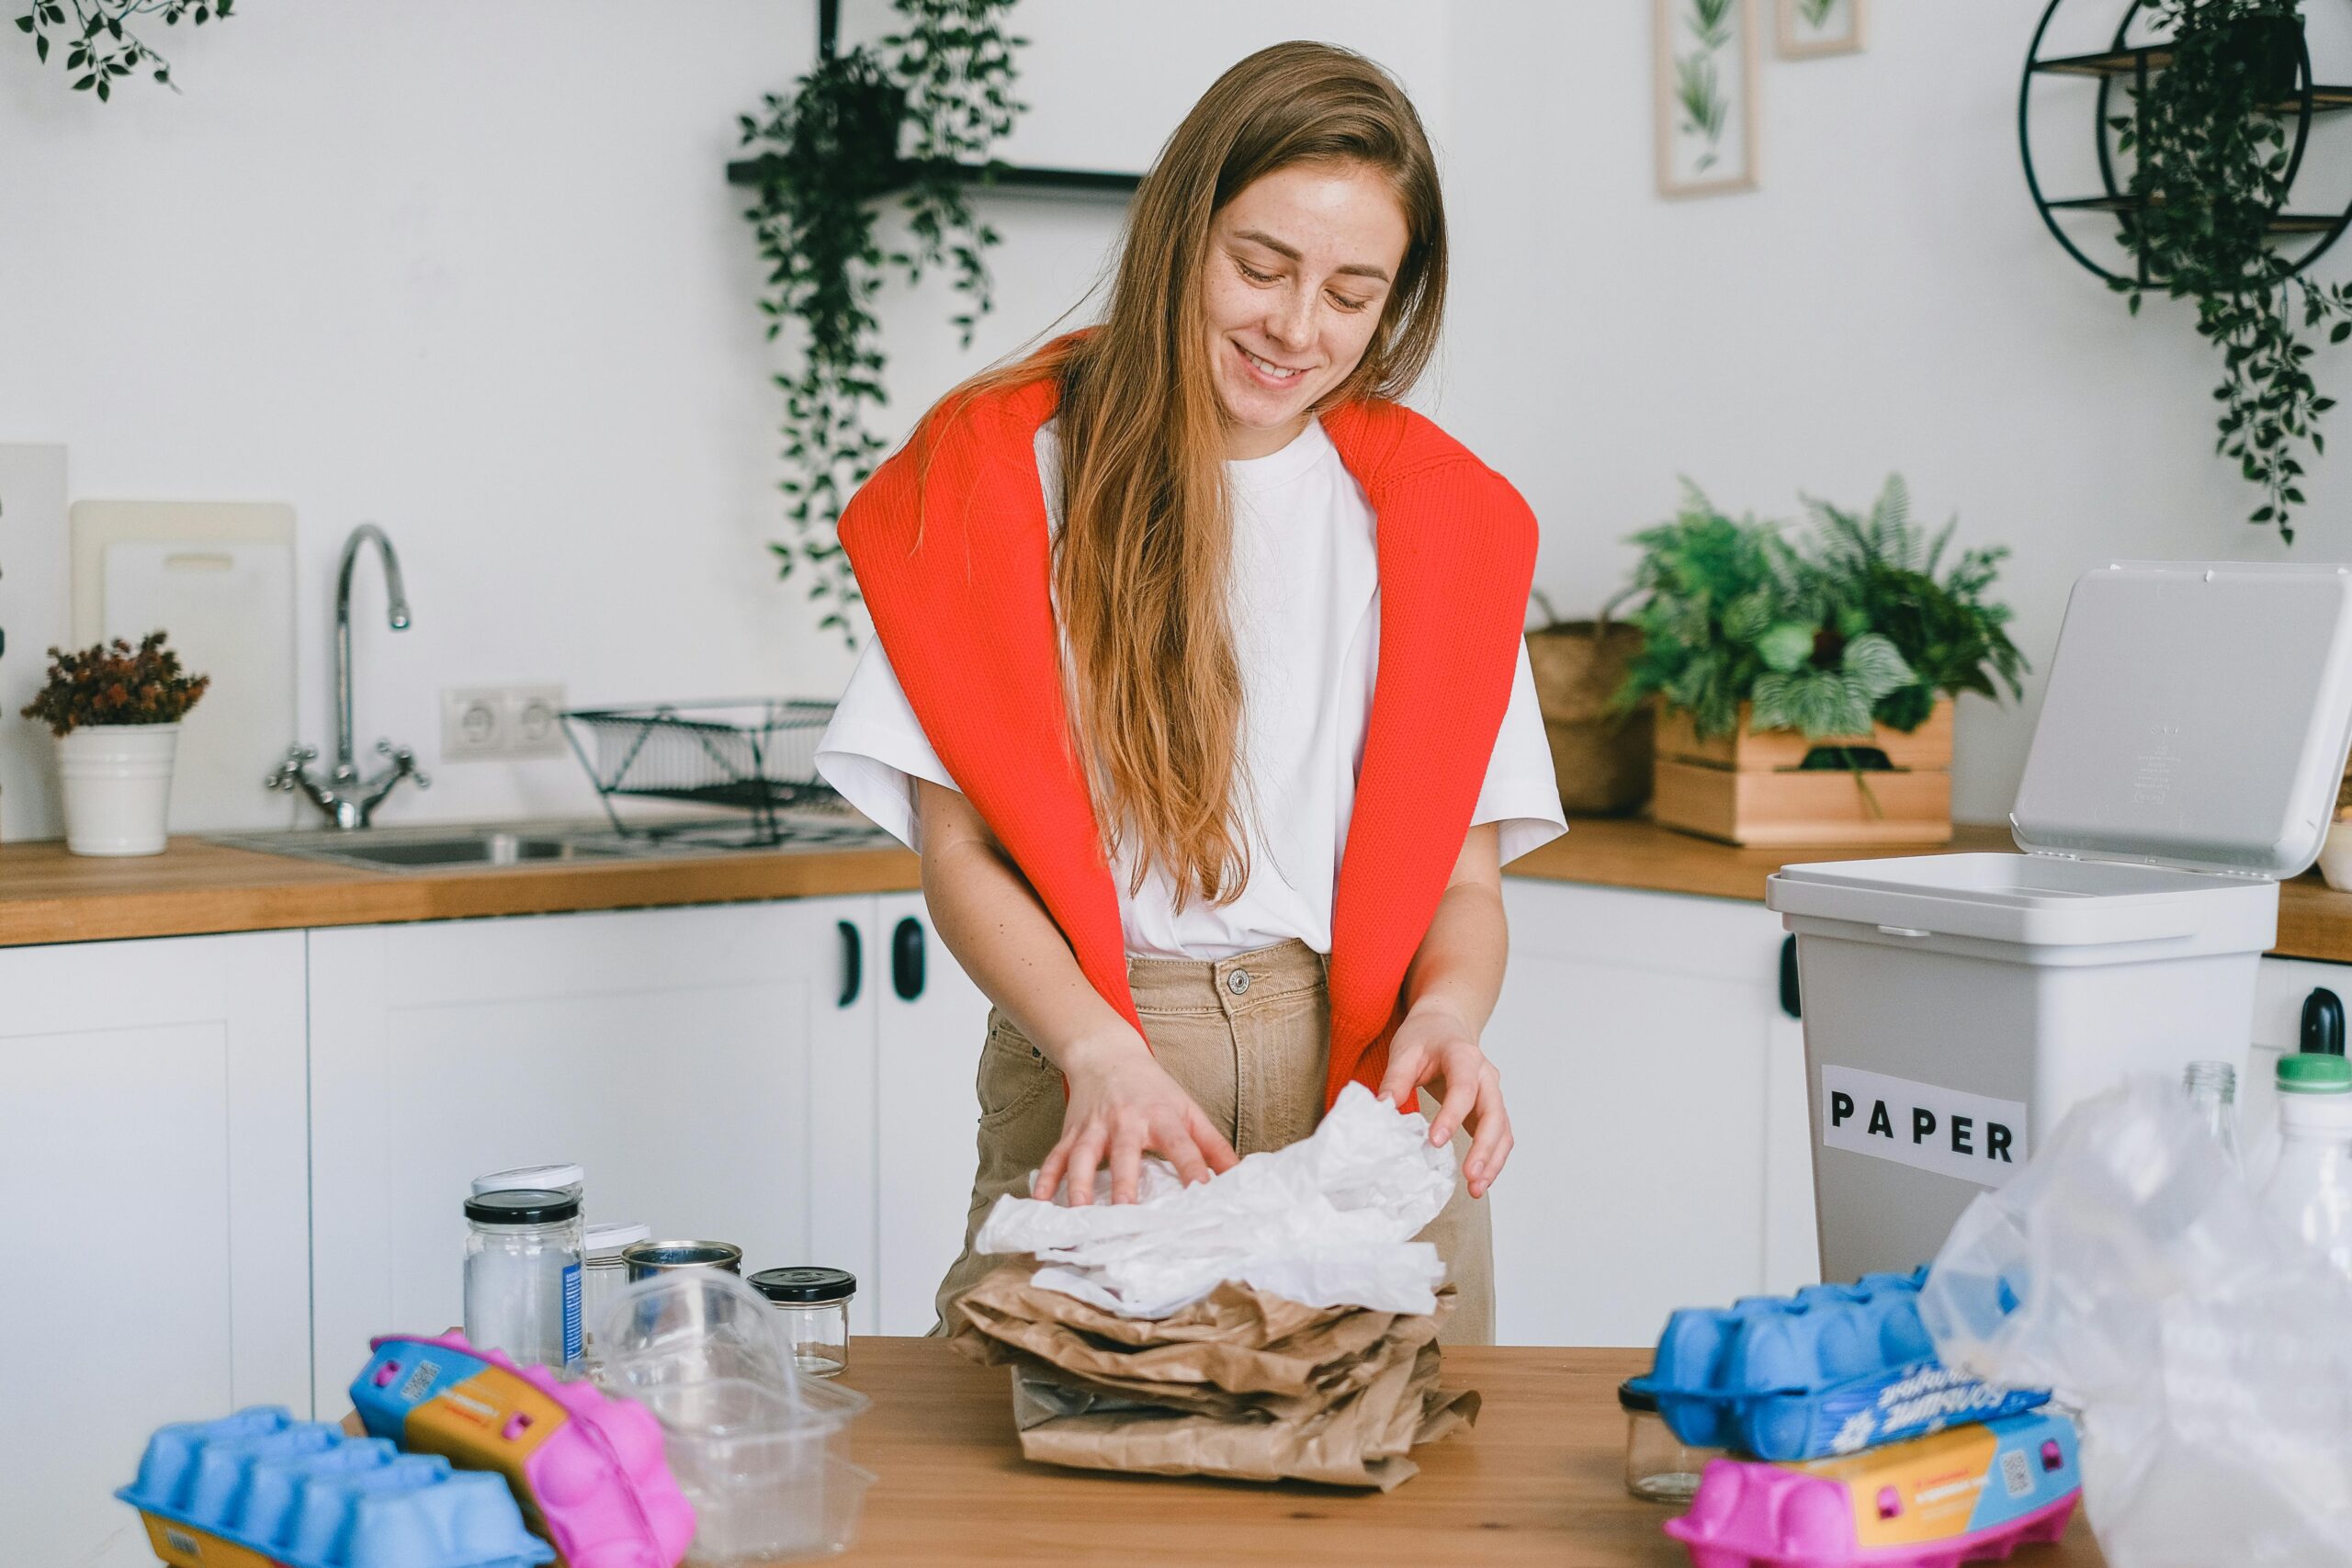 Woman in a minimalist kitchen smiling while organizing a stack of reusable household goods.